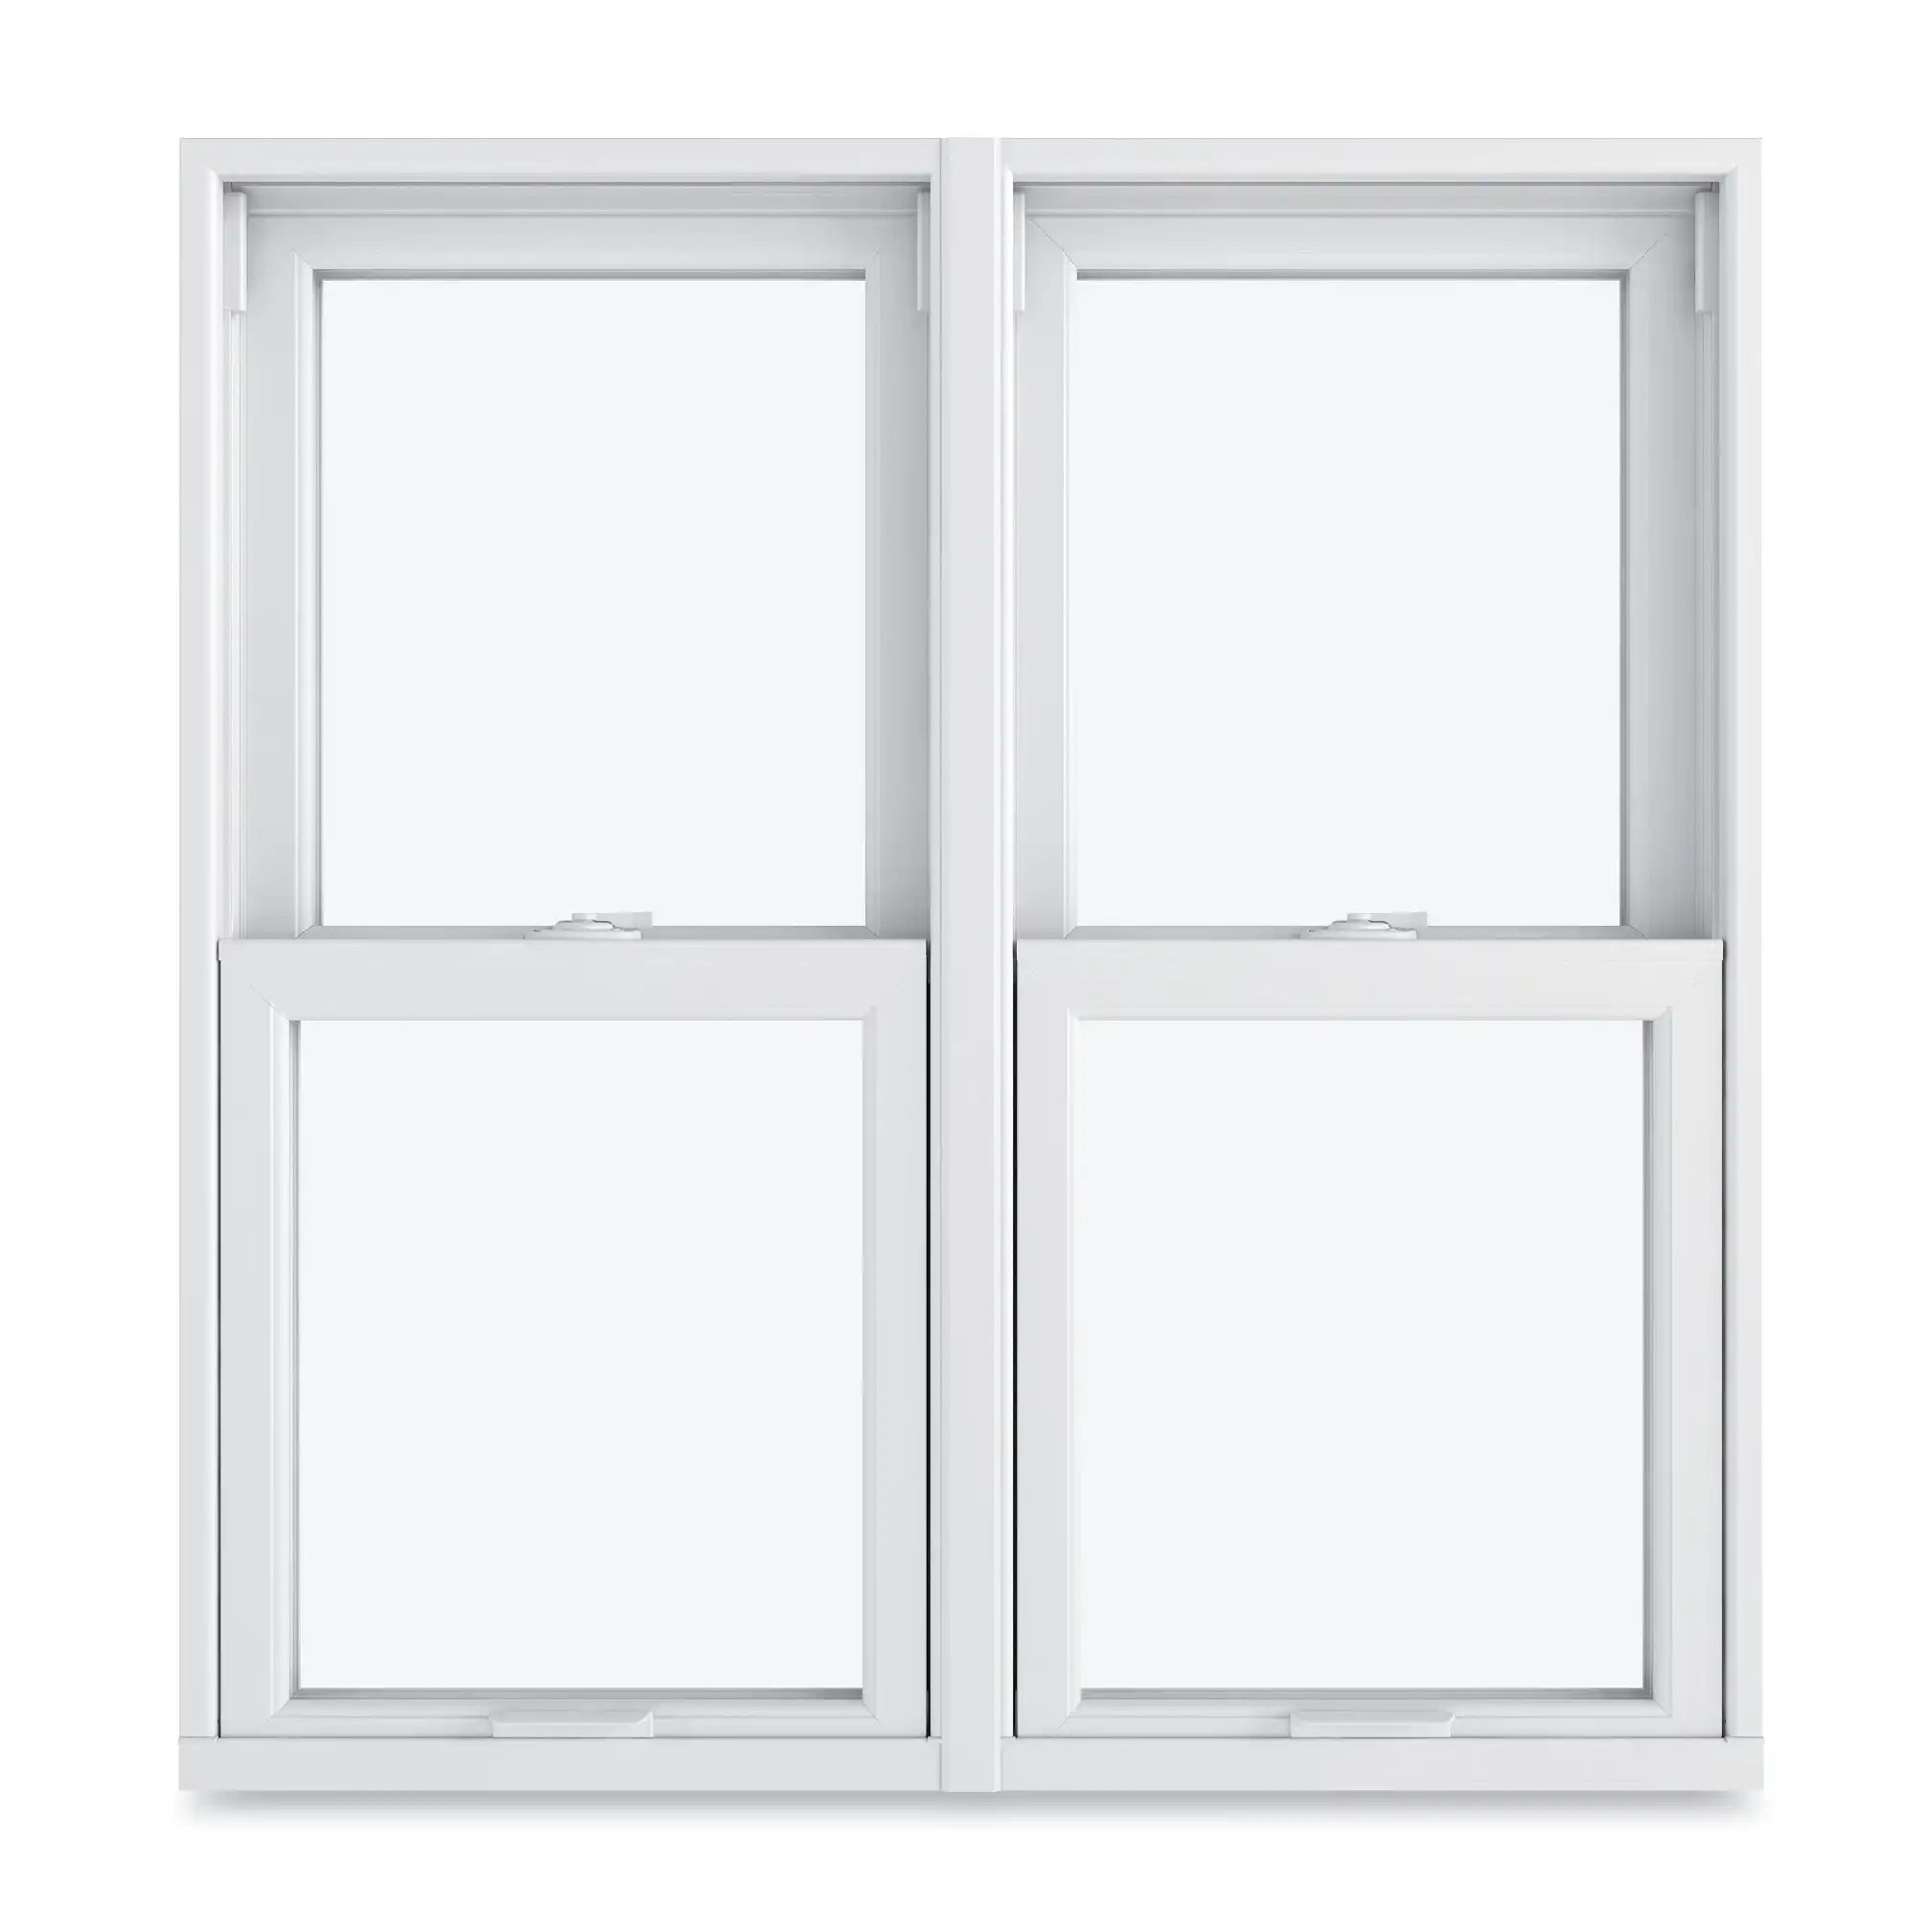 Image of two white Marvin Replacement Double Hung windows mulled together.